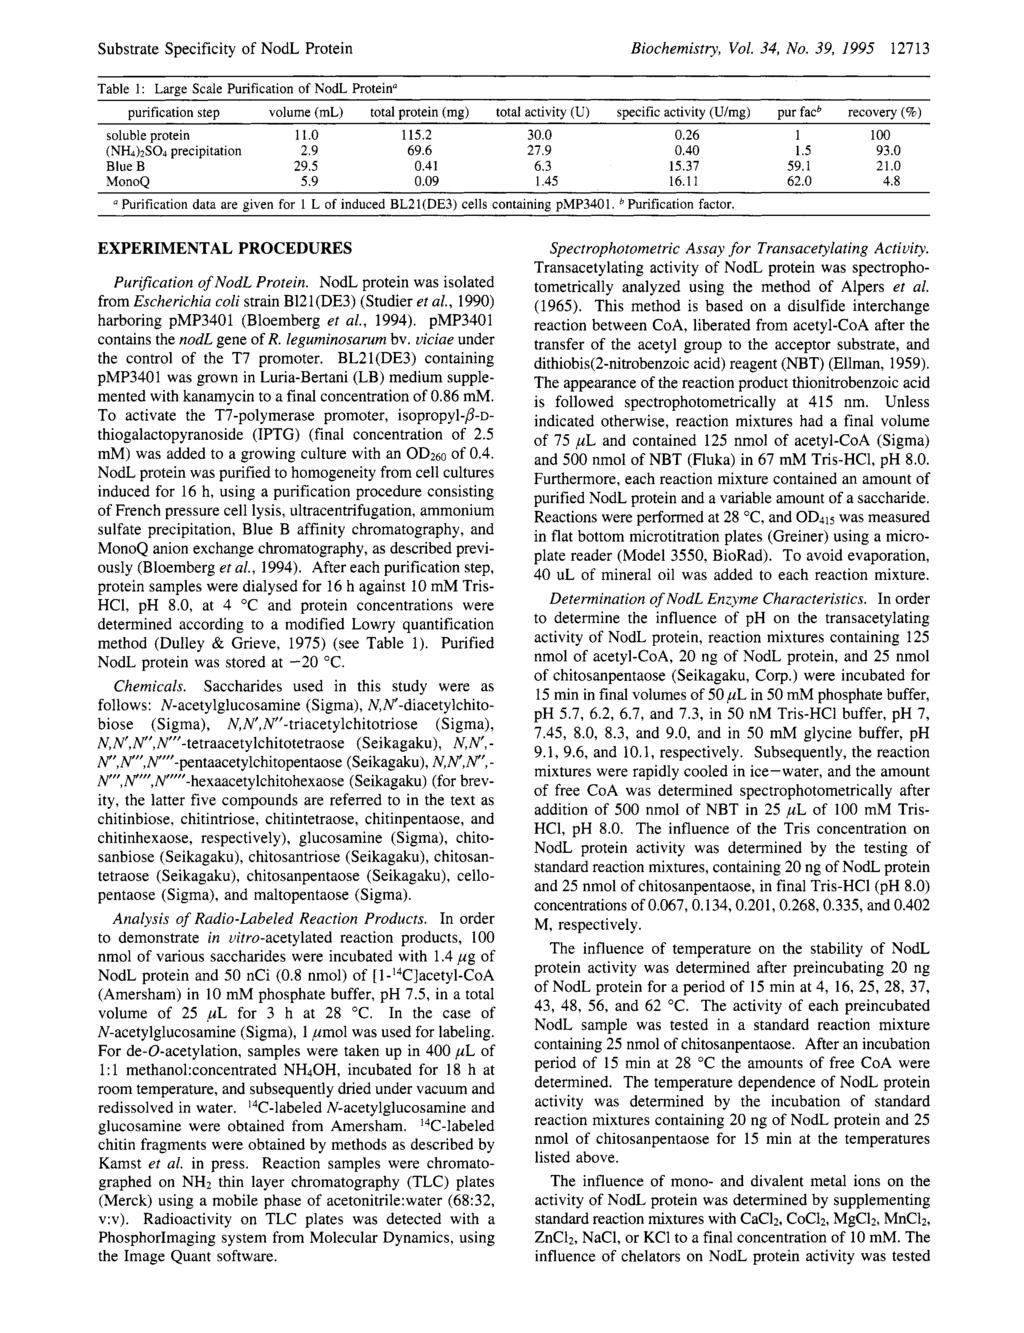 Substrate Speifiity of NodL Protein Biohemistry, Vol. 34, No.